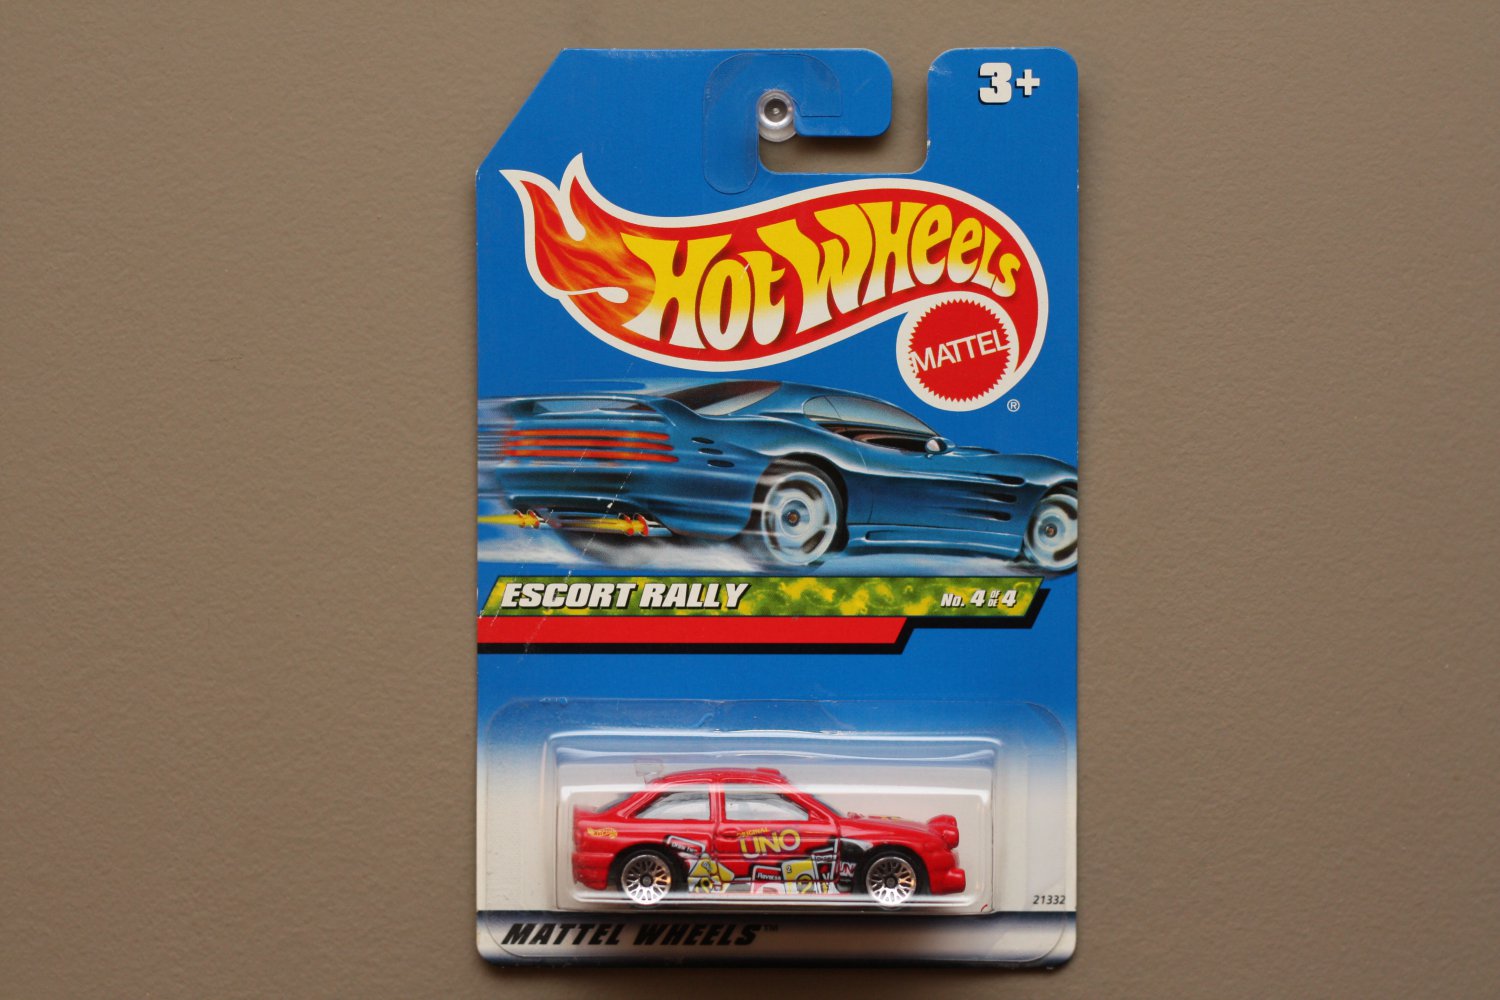 Ford hot wheels games #6